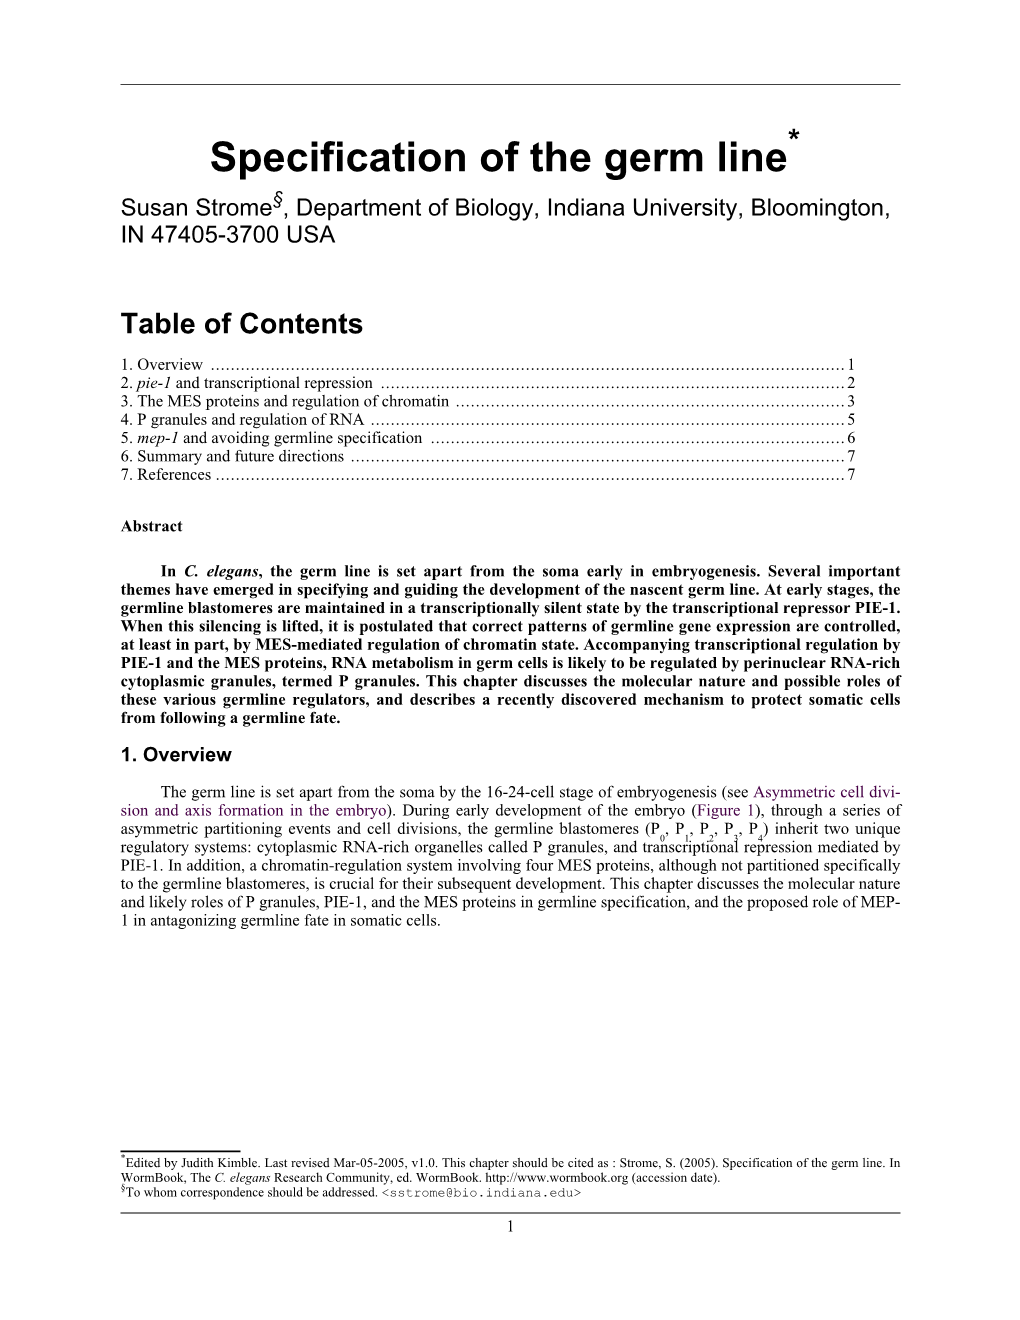 Specification of the Germ Line* Susan Strome§, Department of Biology, Indiana University, Bloomington, in 47405-3700 USA